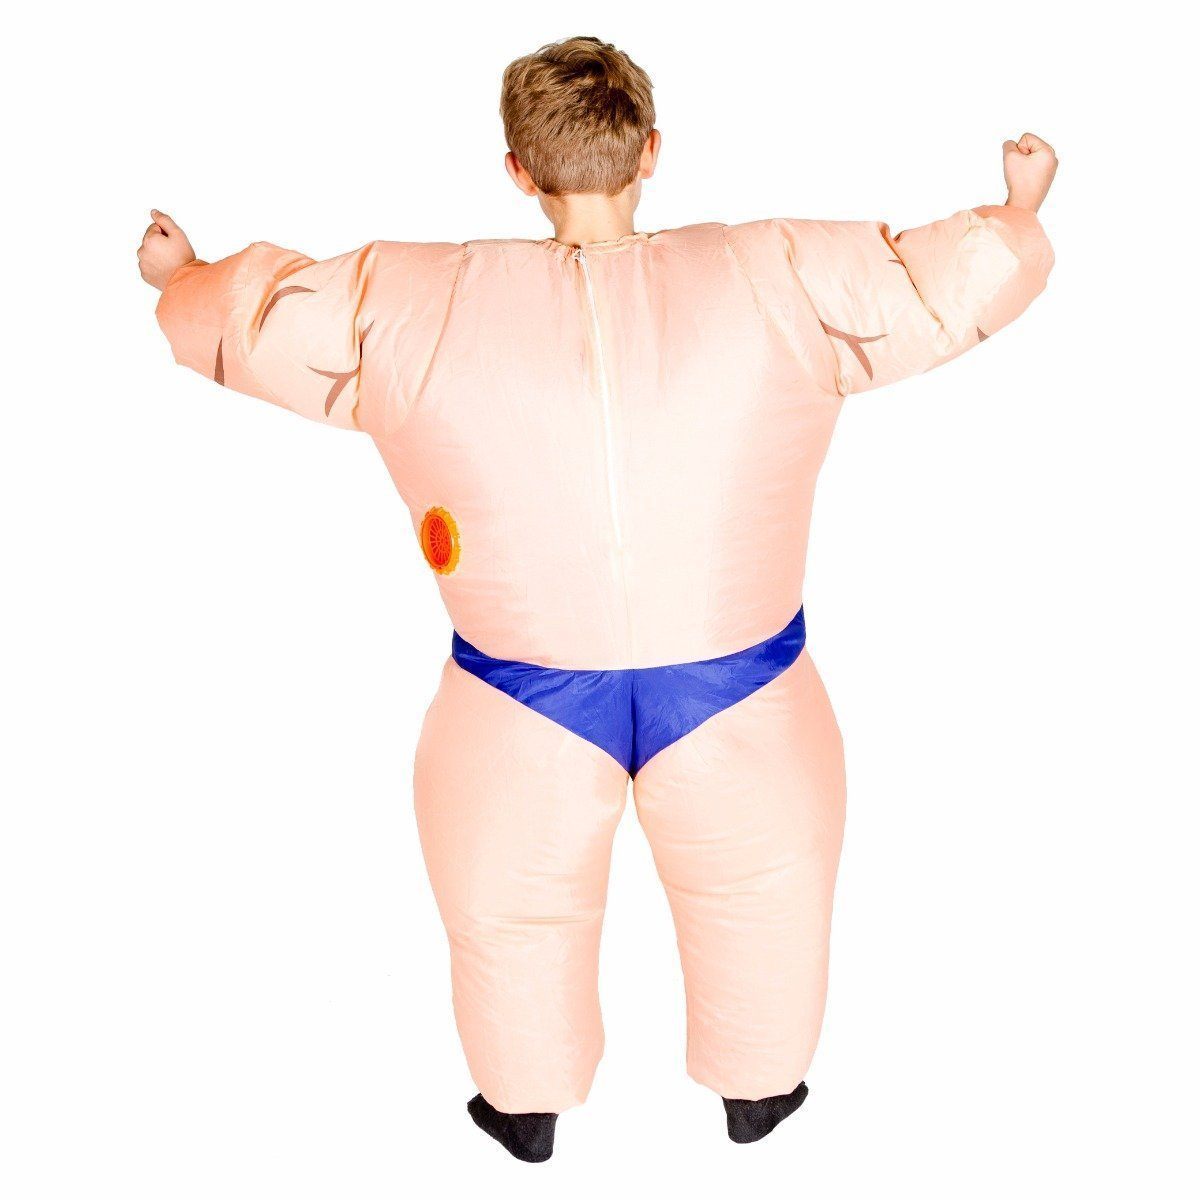 Fancy Dress - Kids Inflatable Muscle Suit Costume